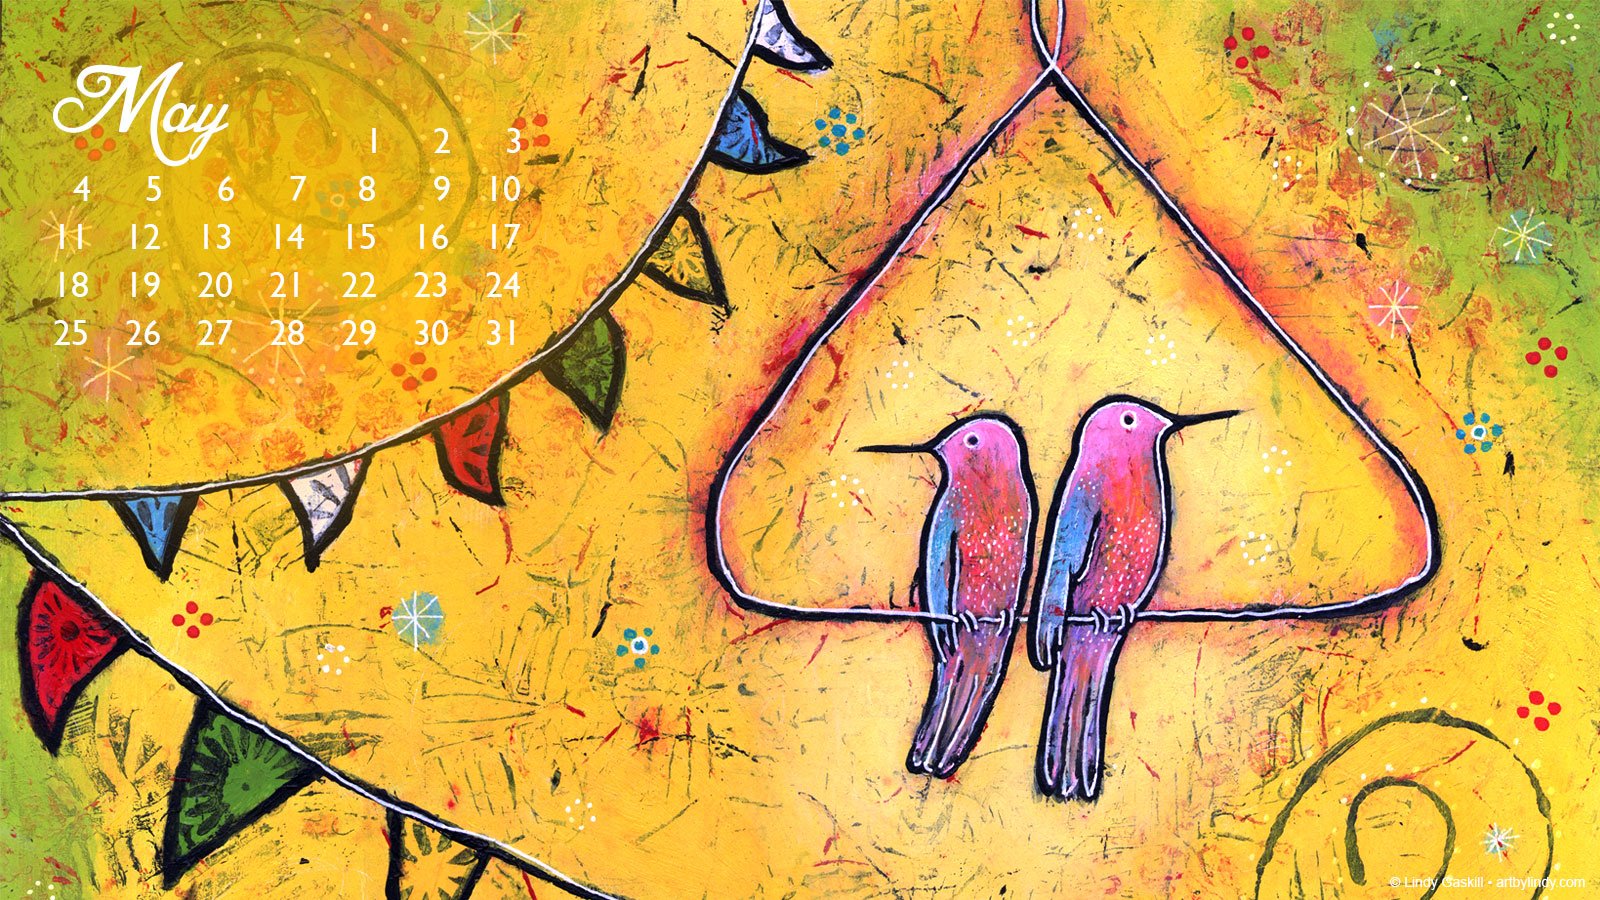 may 2015 calendars may covers for facebook the best may wallpapers